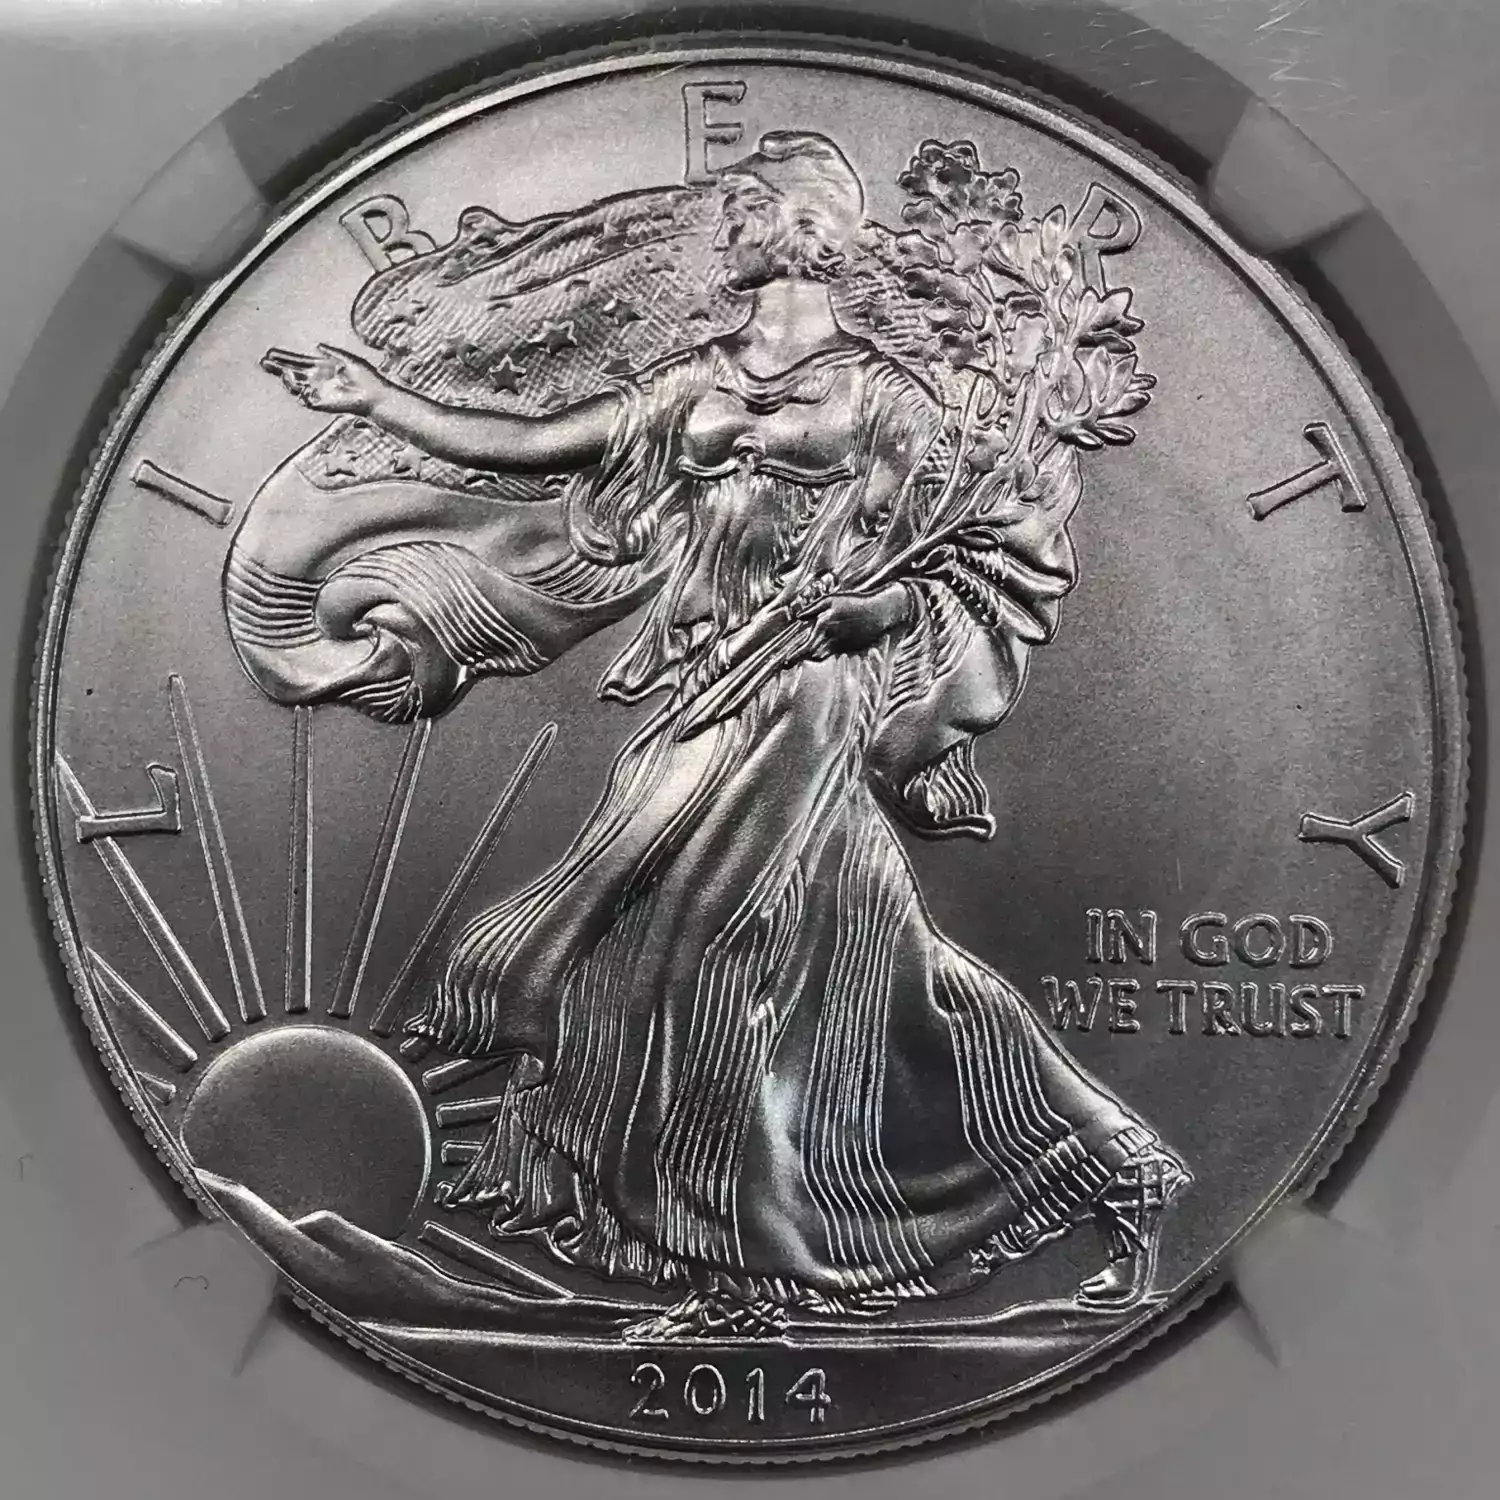 2014(W) EARLY RELEASES Struck at West Point Mint  (2)